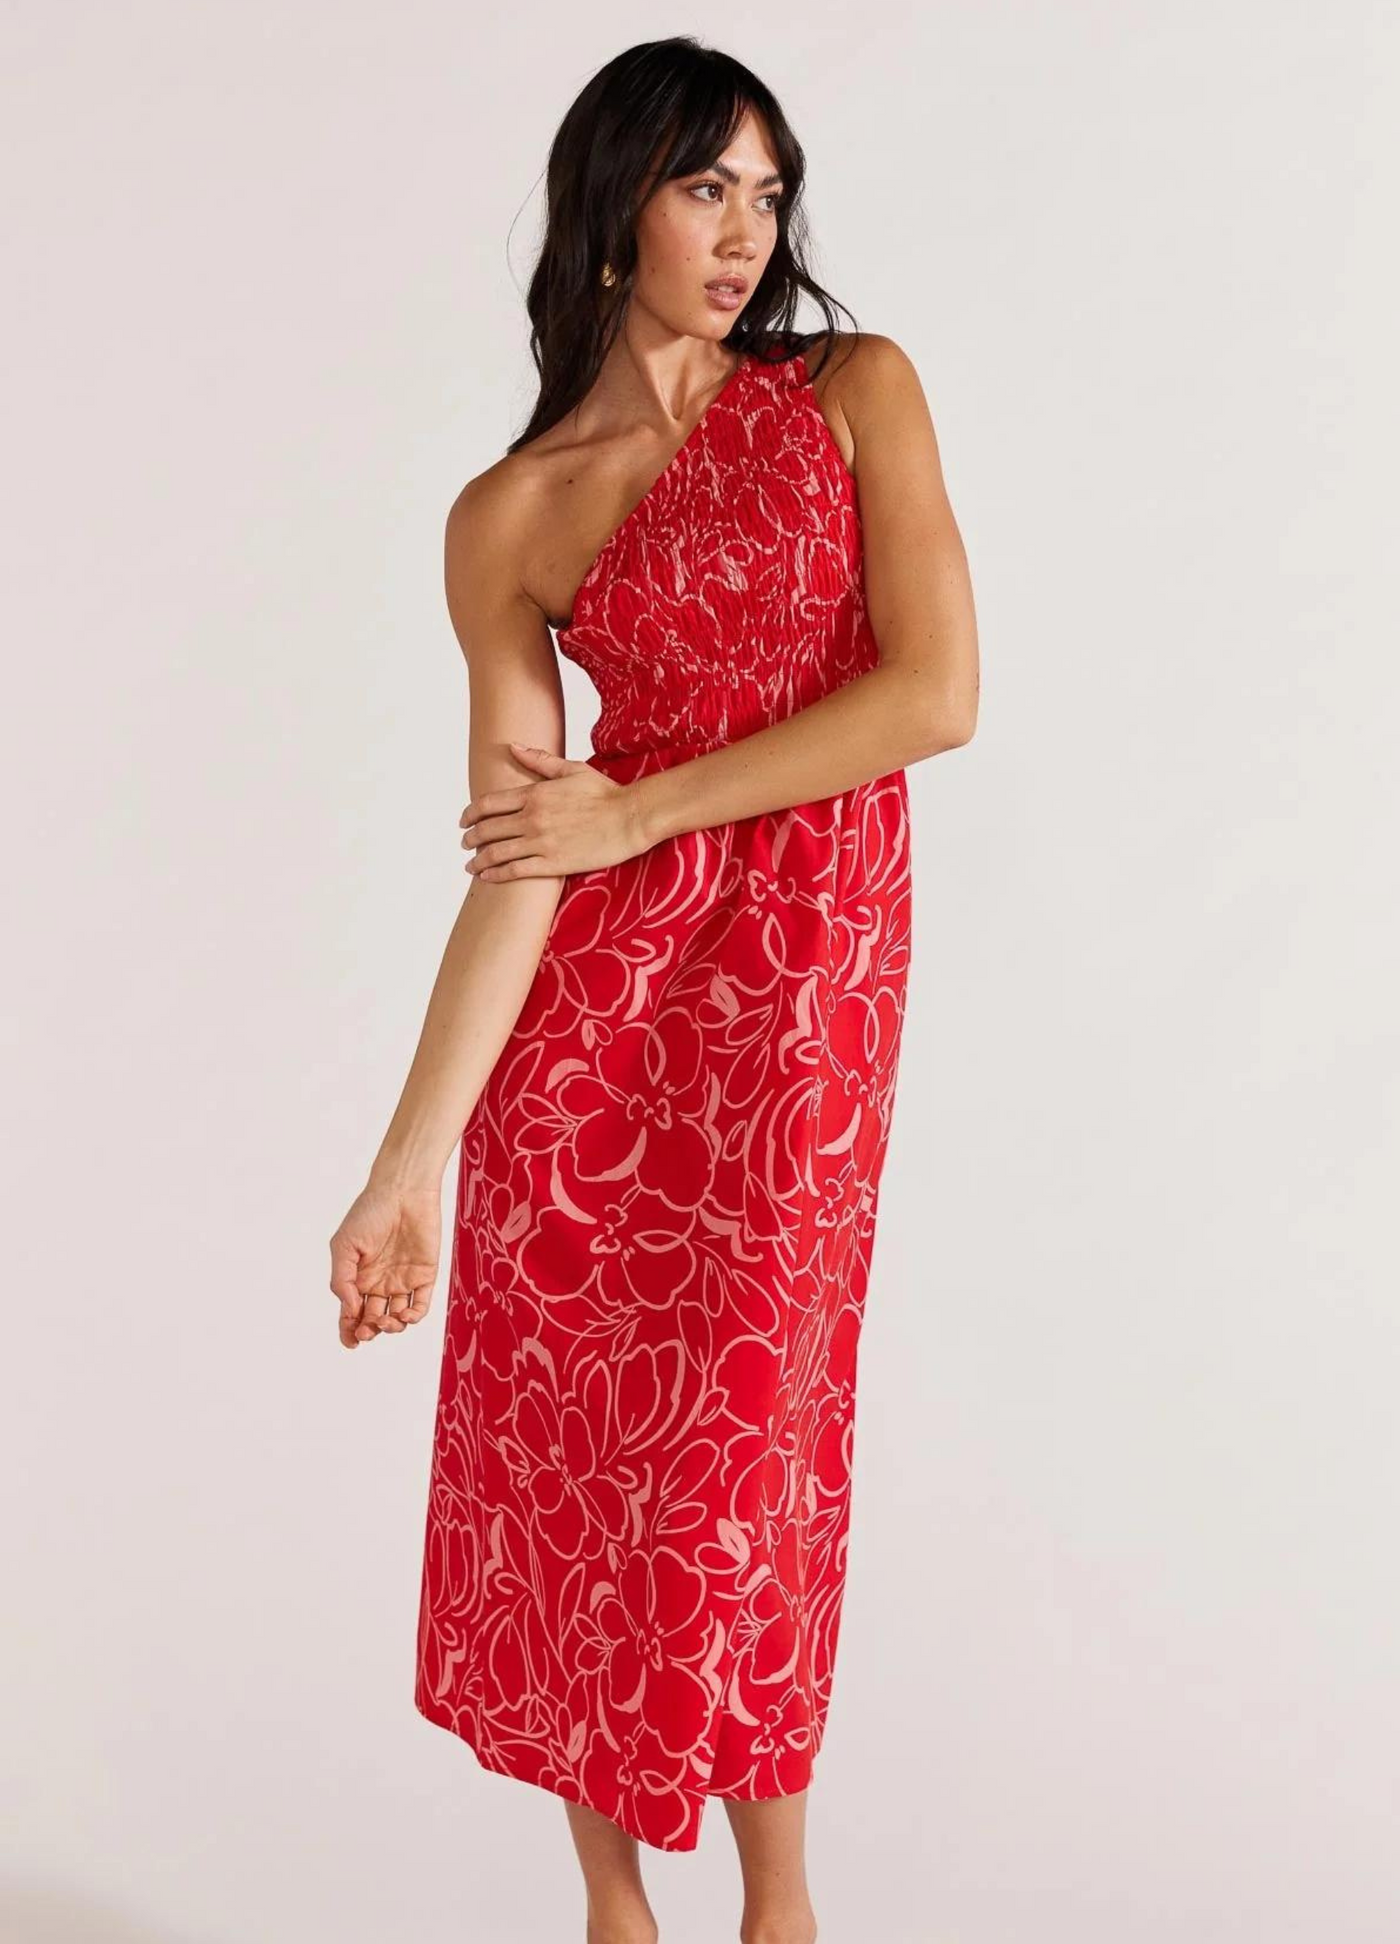 One shoulder shirred sundress in red and white floral print midi length from Staple the Label